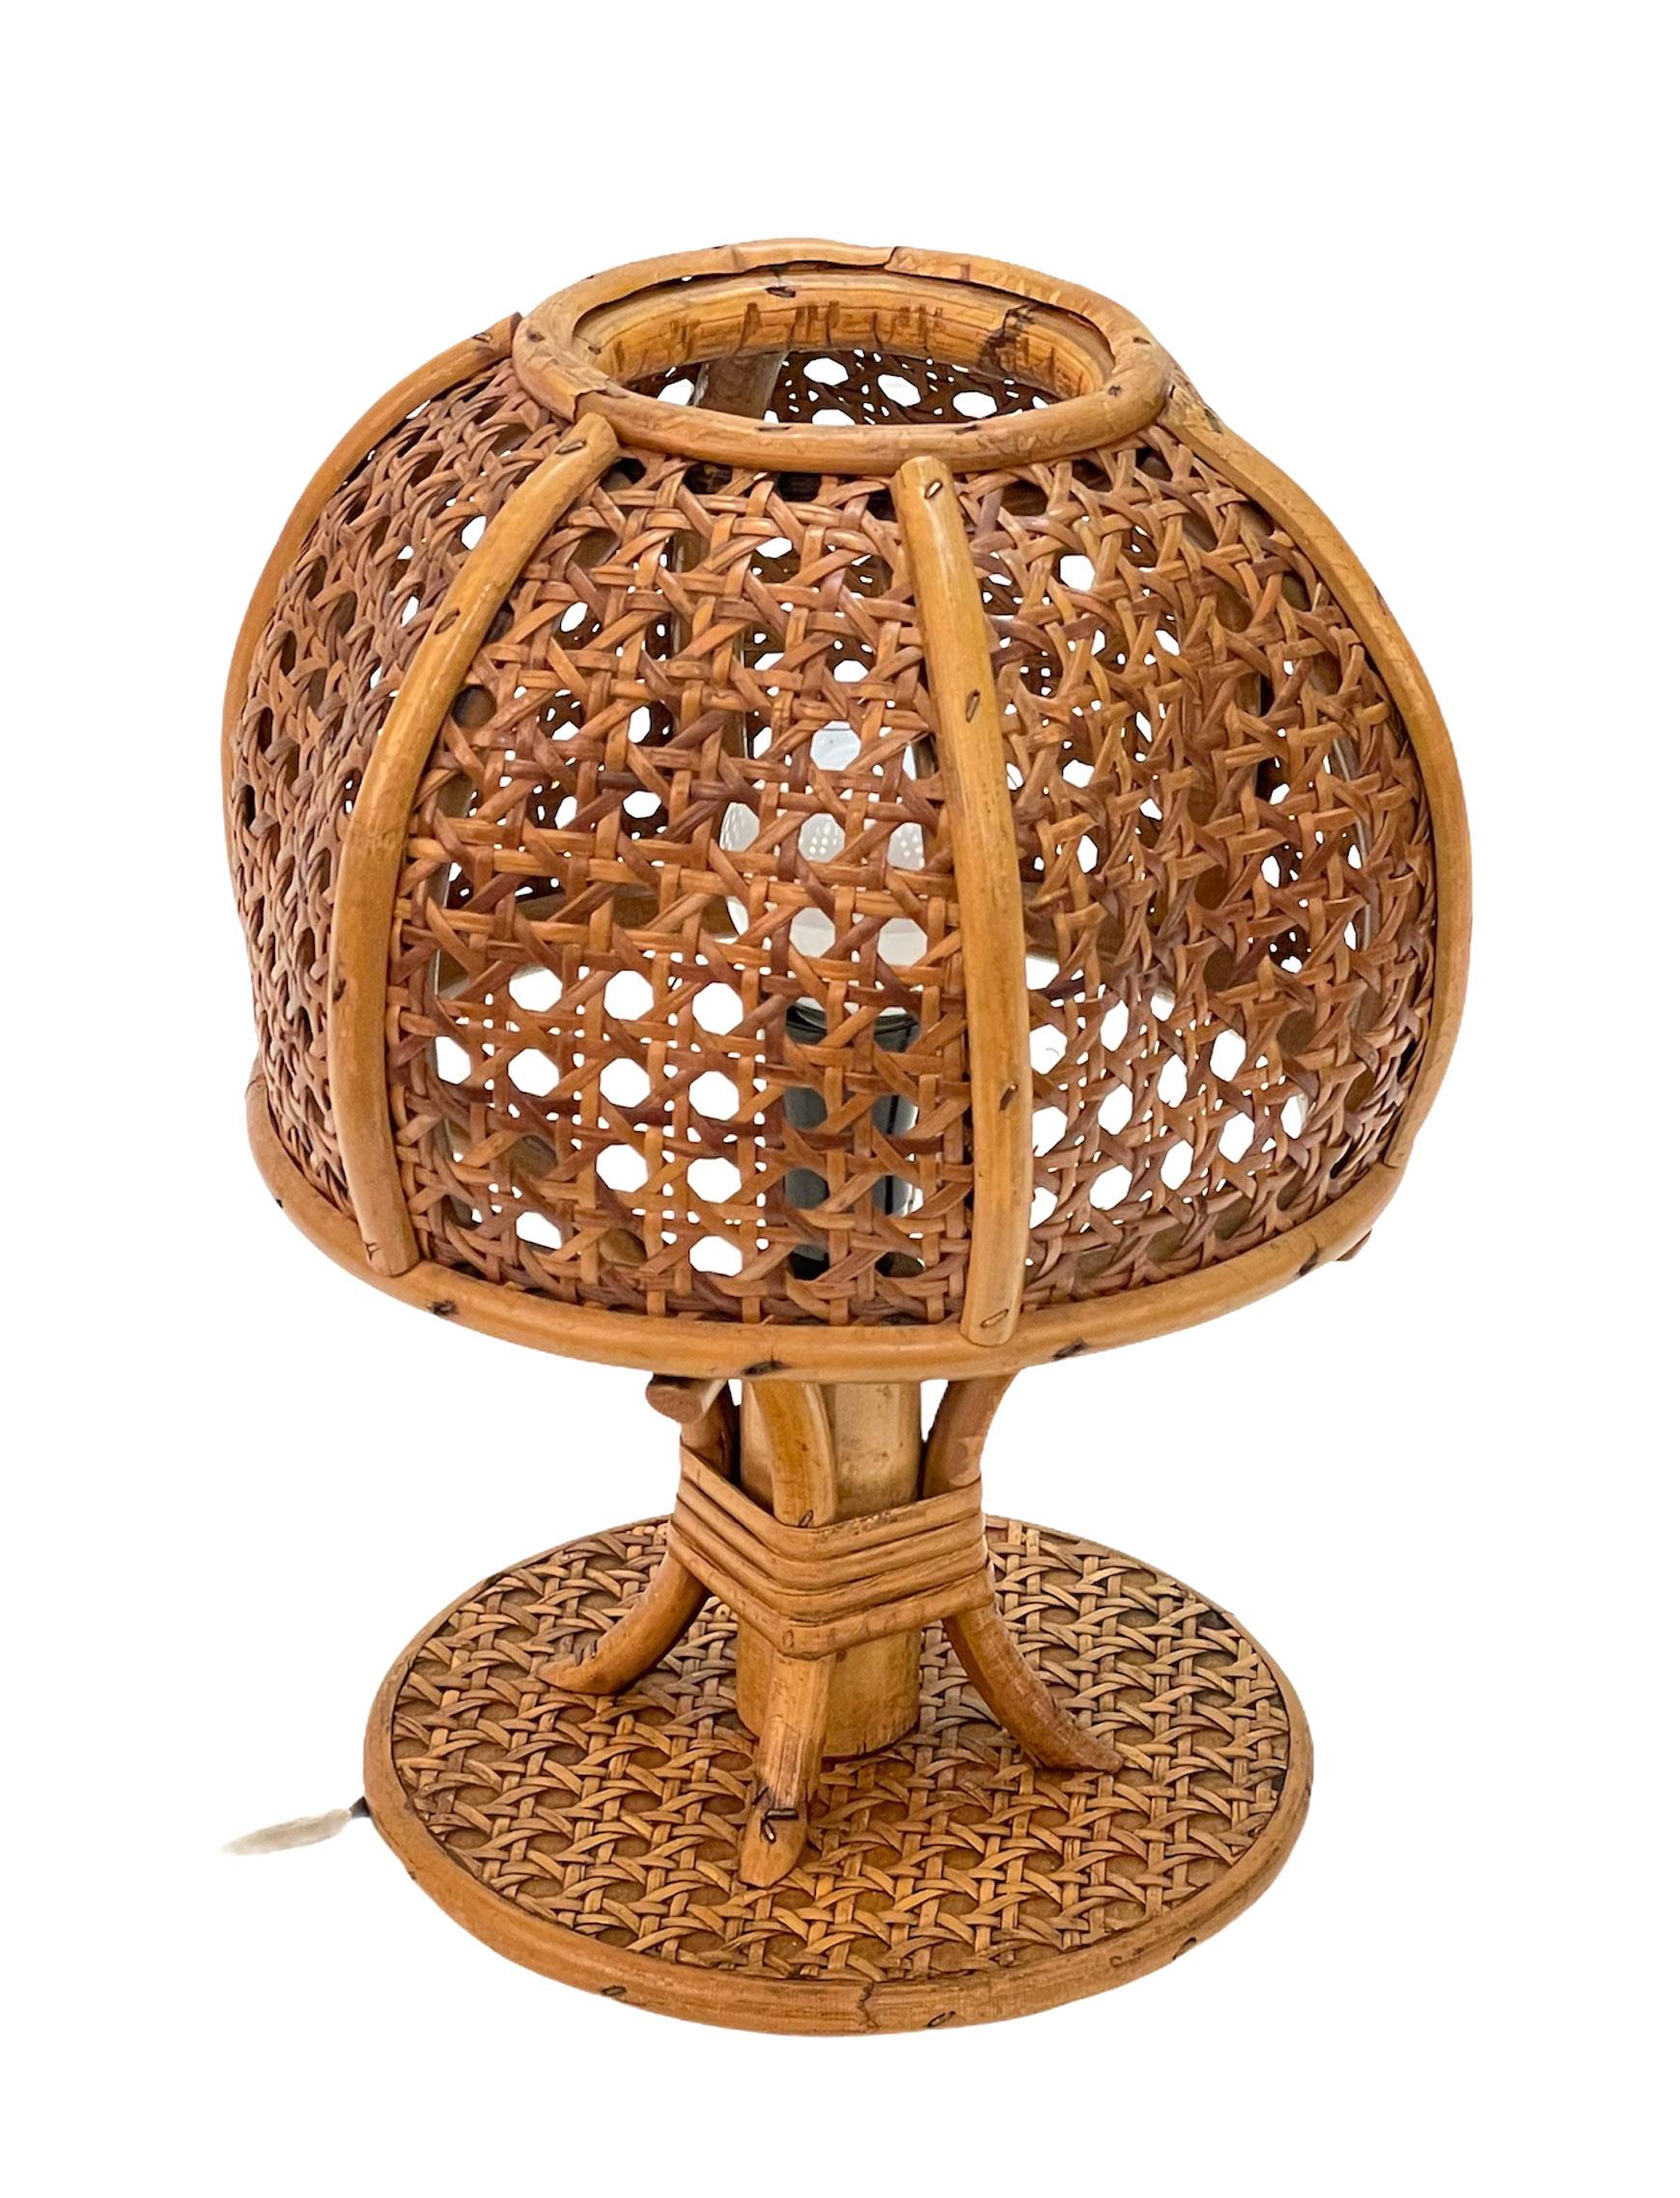 Midcentury Wicker and Rattan Italian Table Lamp, 1960s For Sale 9